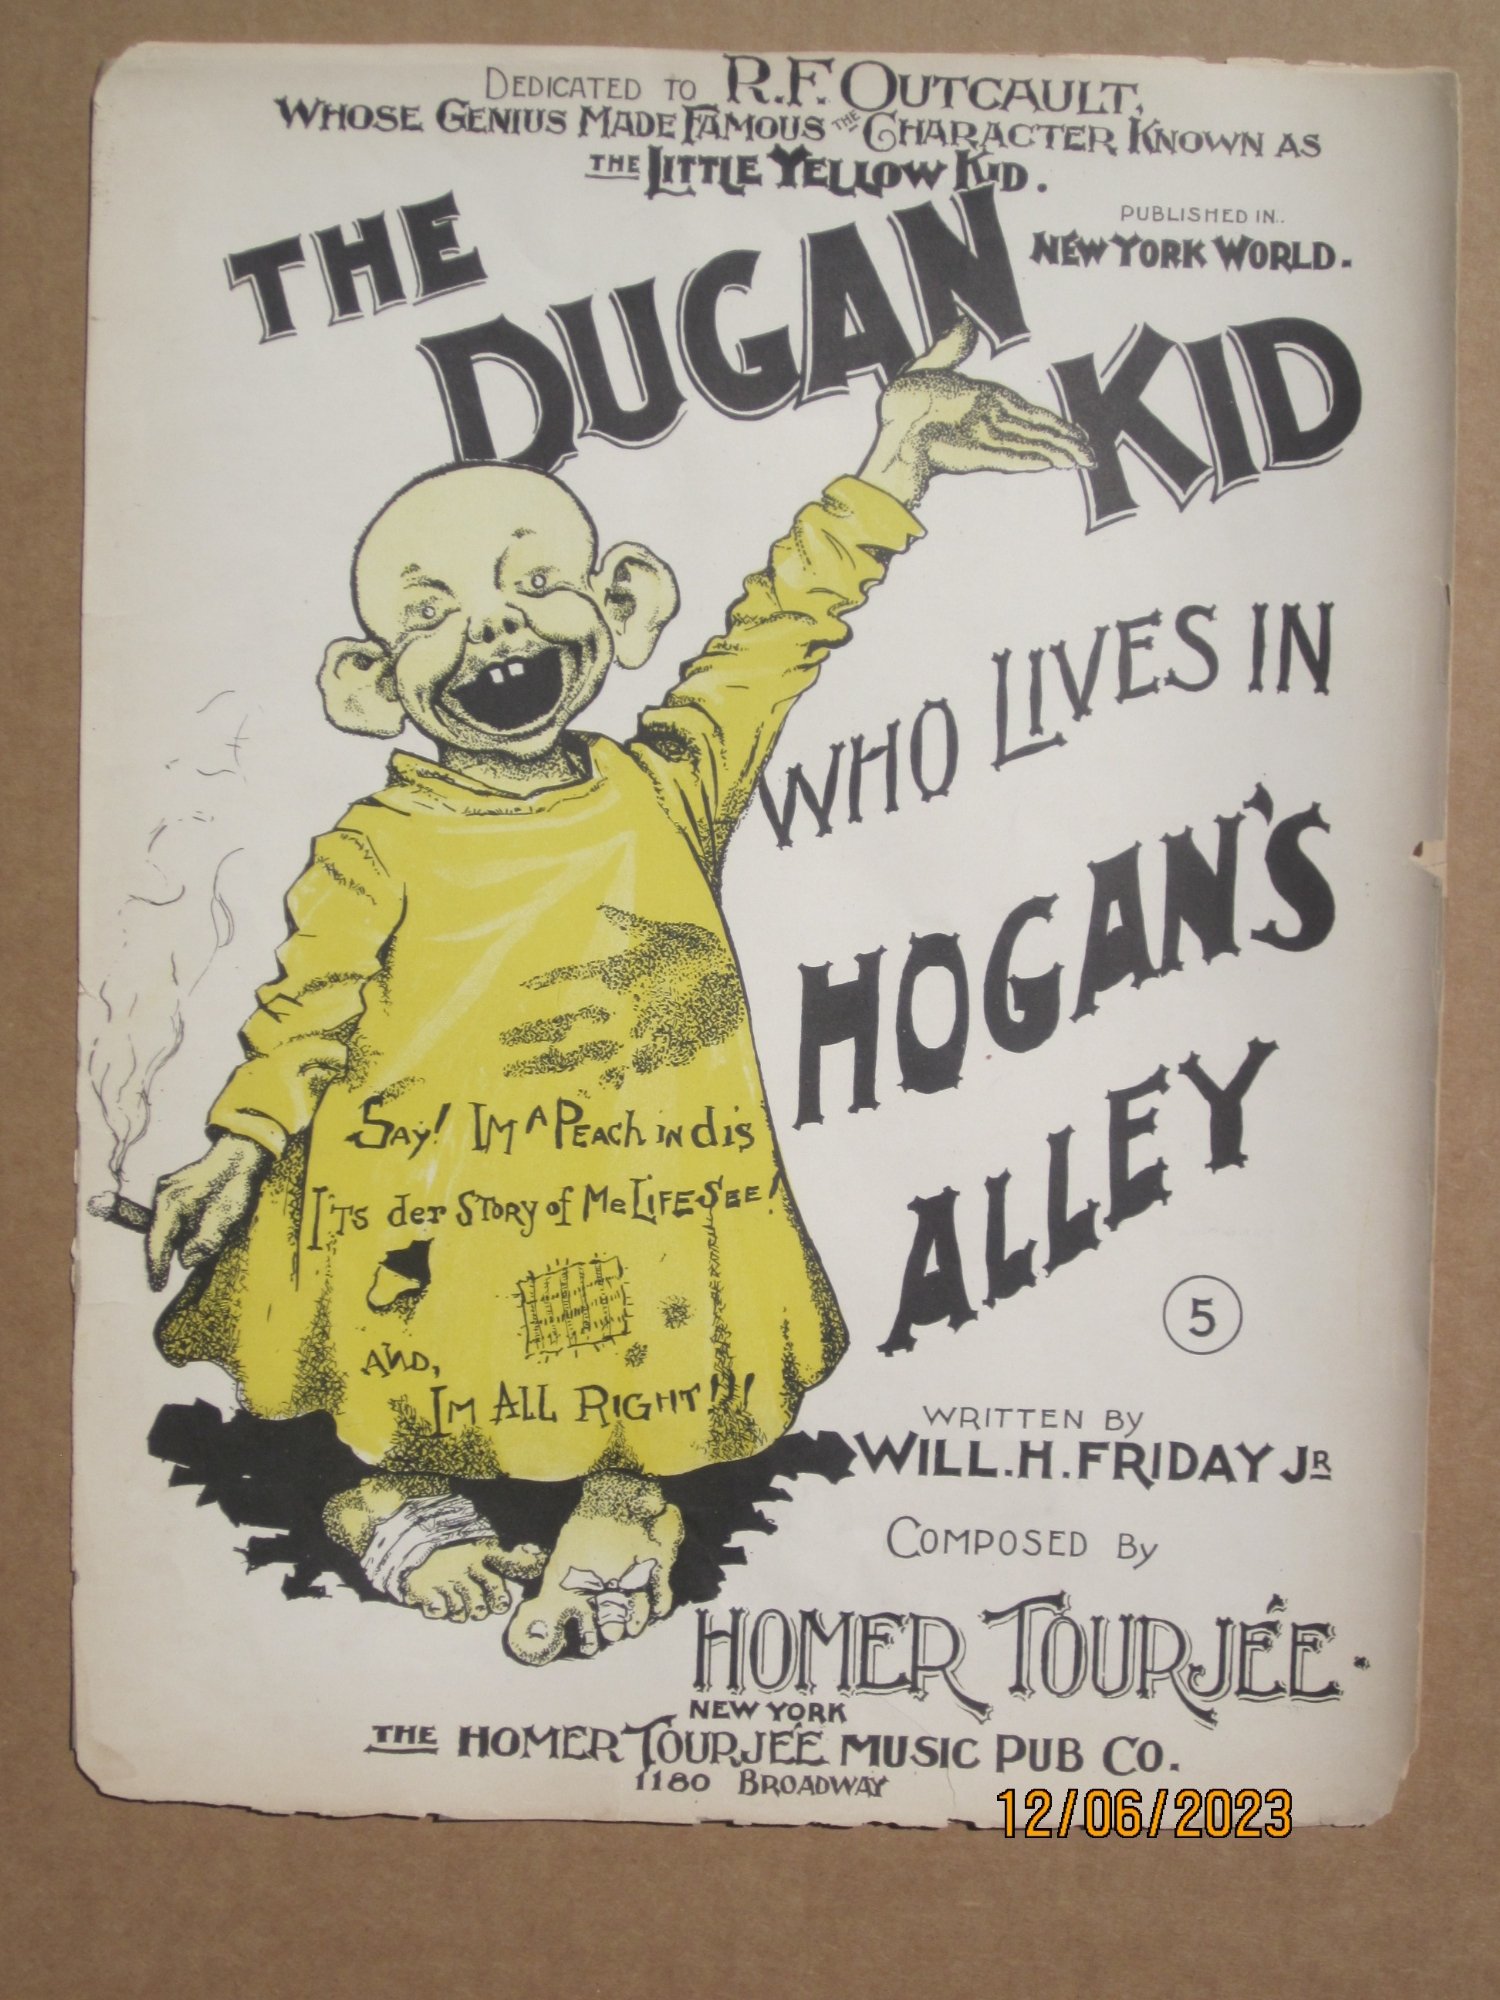 The Dugan Kid who lives in Hogan's Alley (1896), in Dennis Books's 